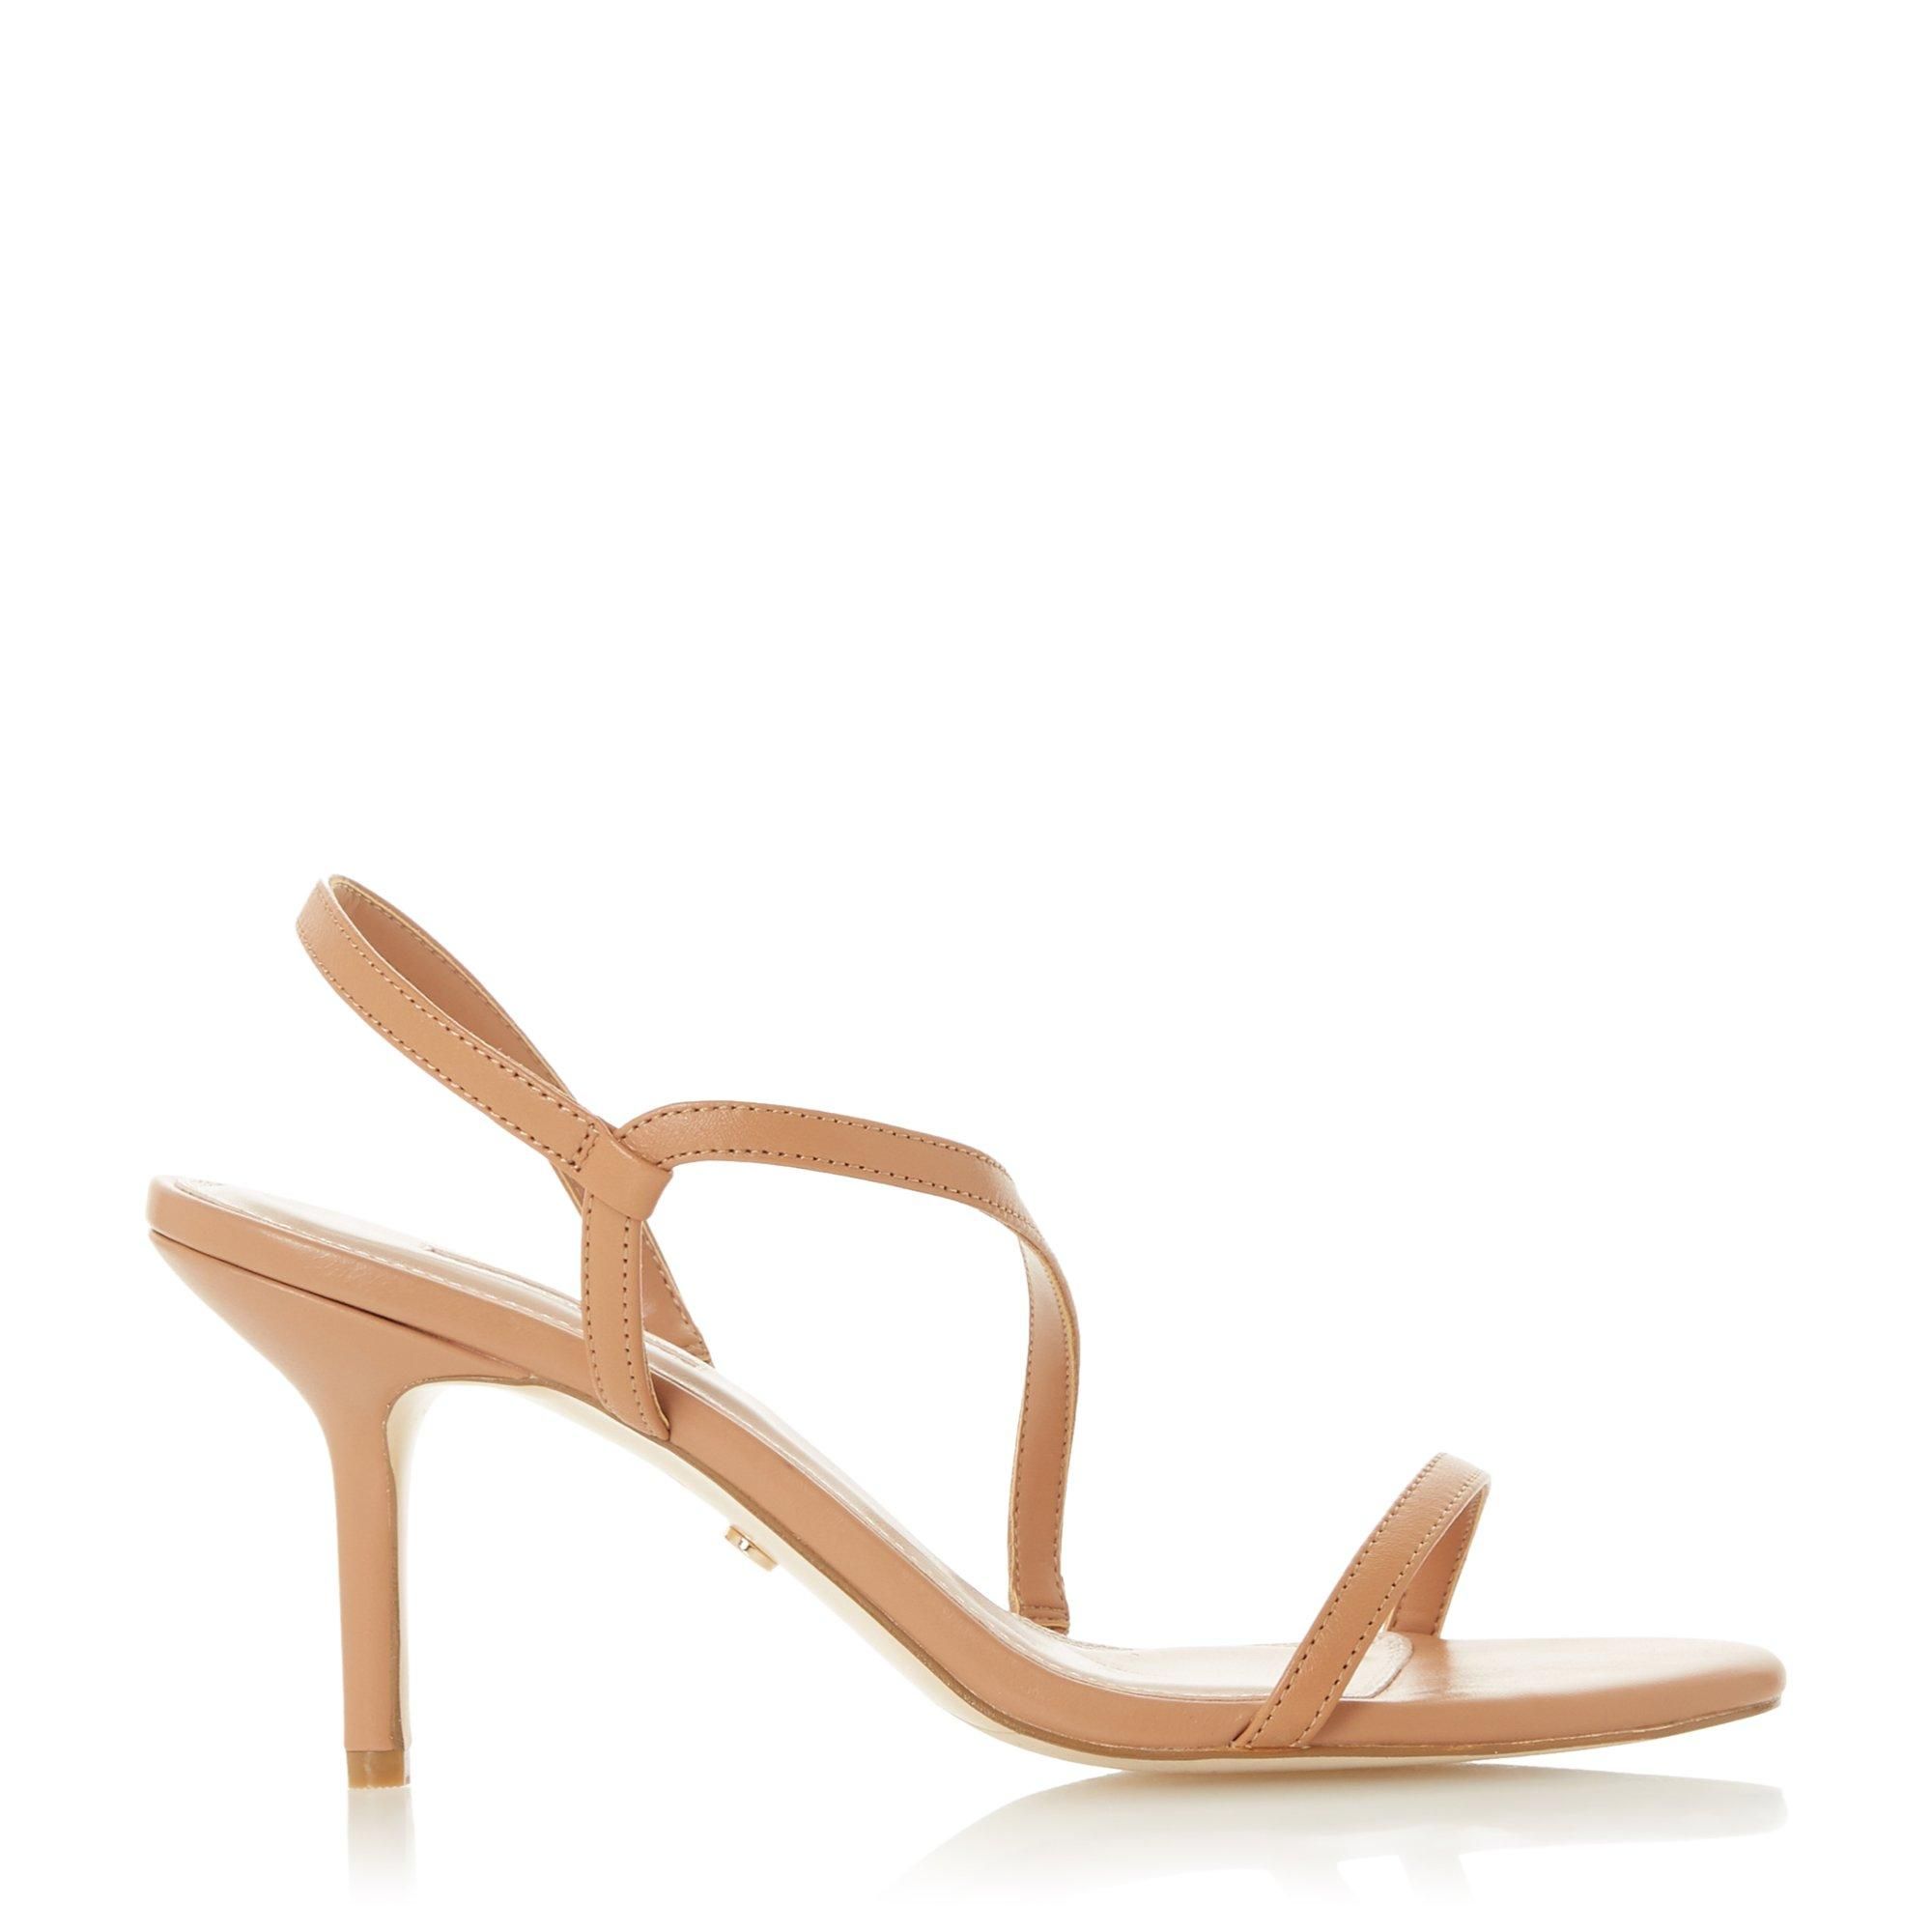 This sandal by Dune London is a simple yet stylish evening option. Showcasing a feminine asymmetric strap with a slingback design. It features an open sandal toe and rests on a mid stiletto heel.